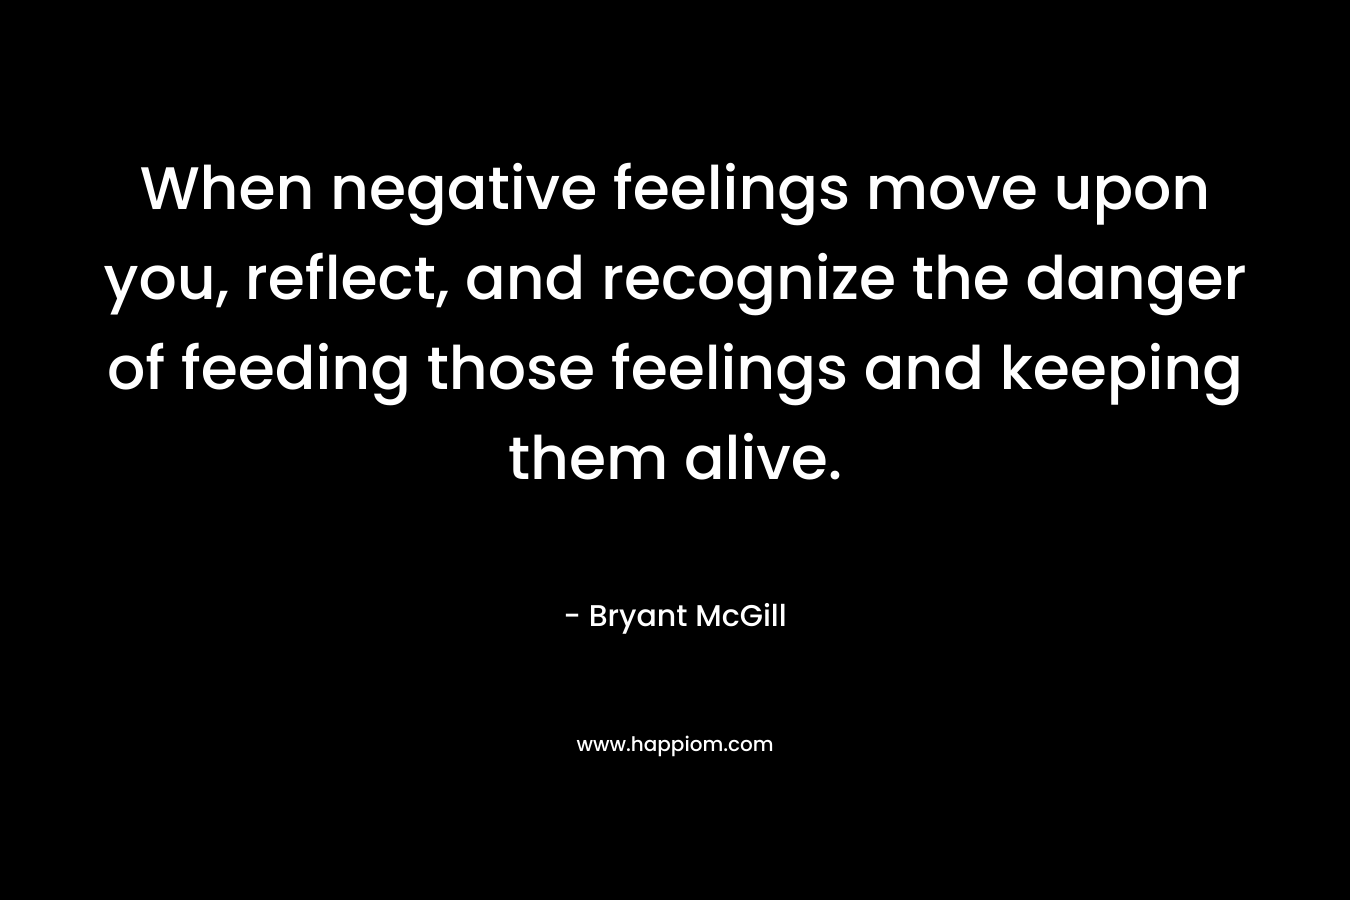 When negative feelings move upon you, reflect, and recognize the danger of feeding those feelings and keeping them alive. – Bryant McGill